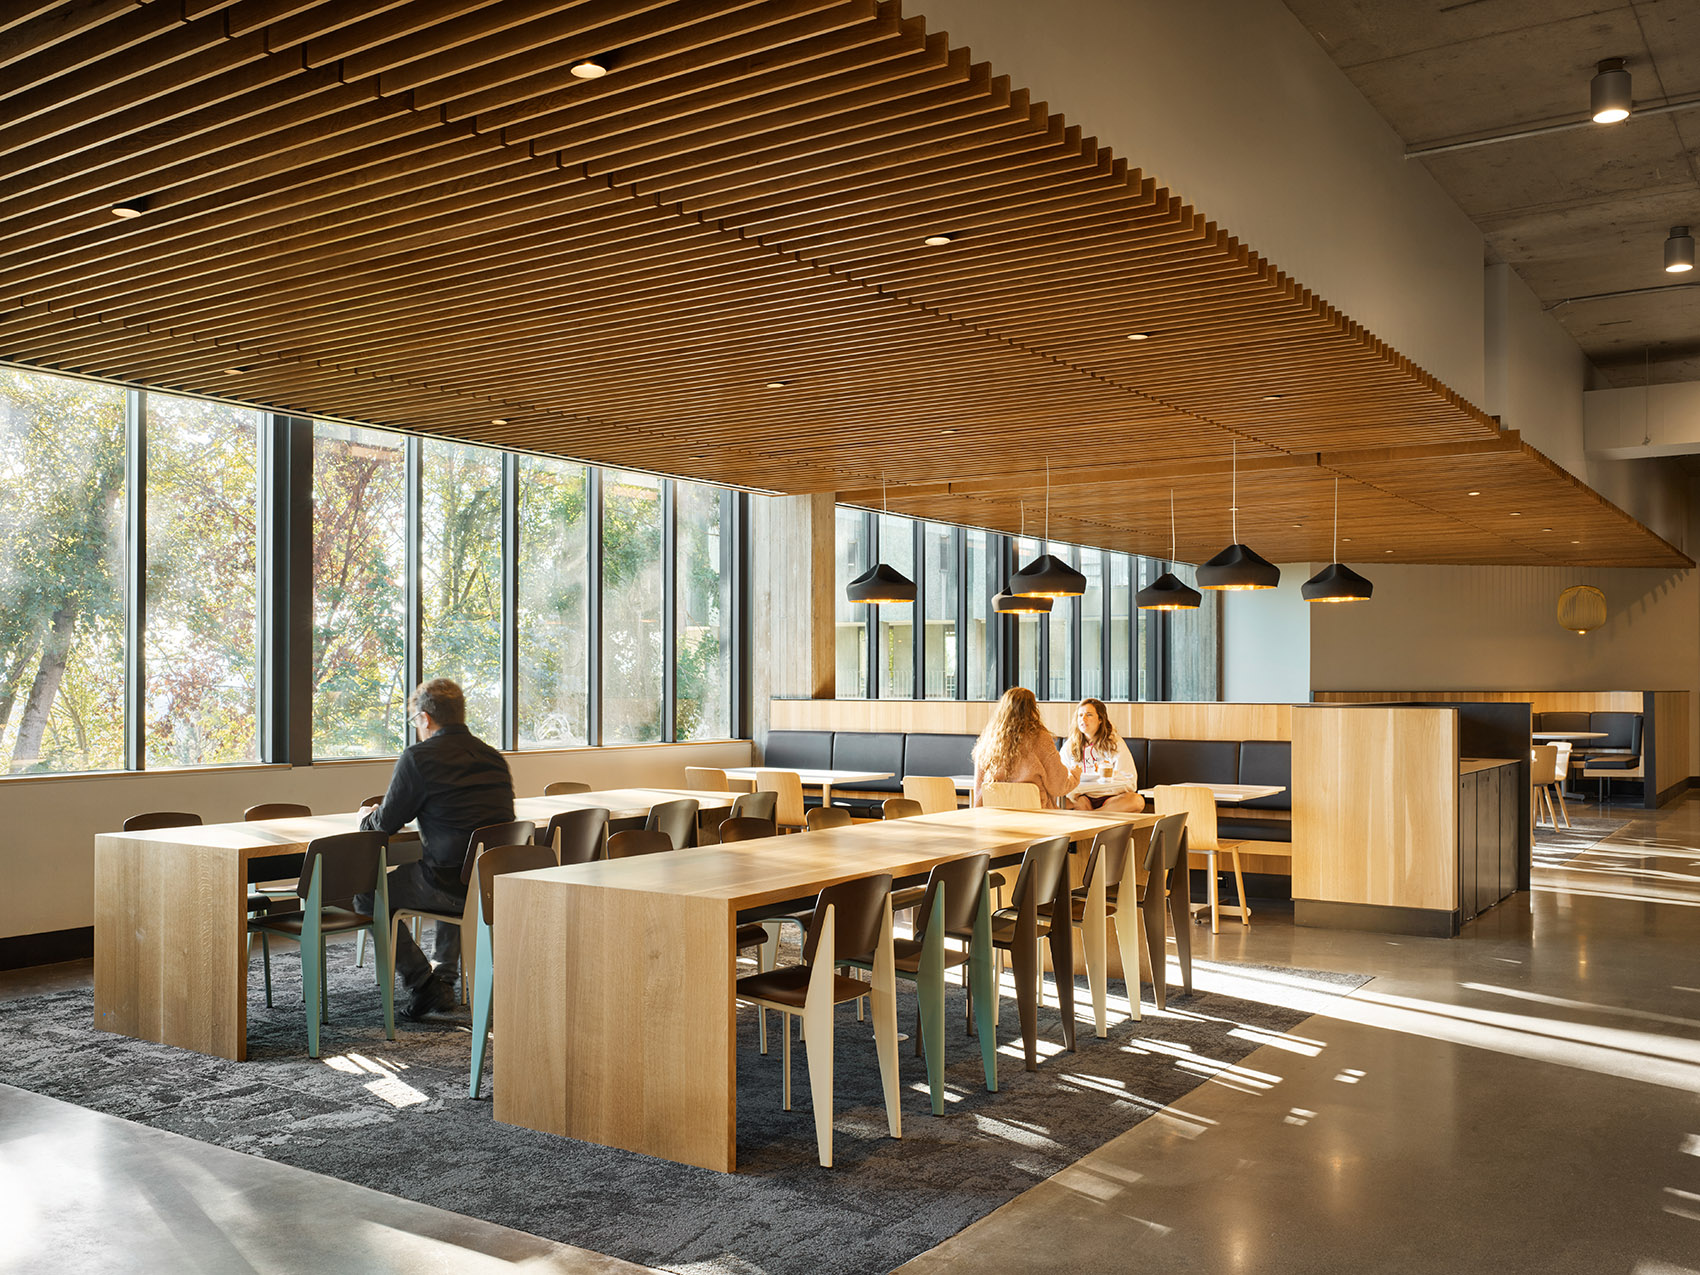 019 Center Table At North Campus Of University Of Washington By Graham Baba Architects 